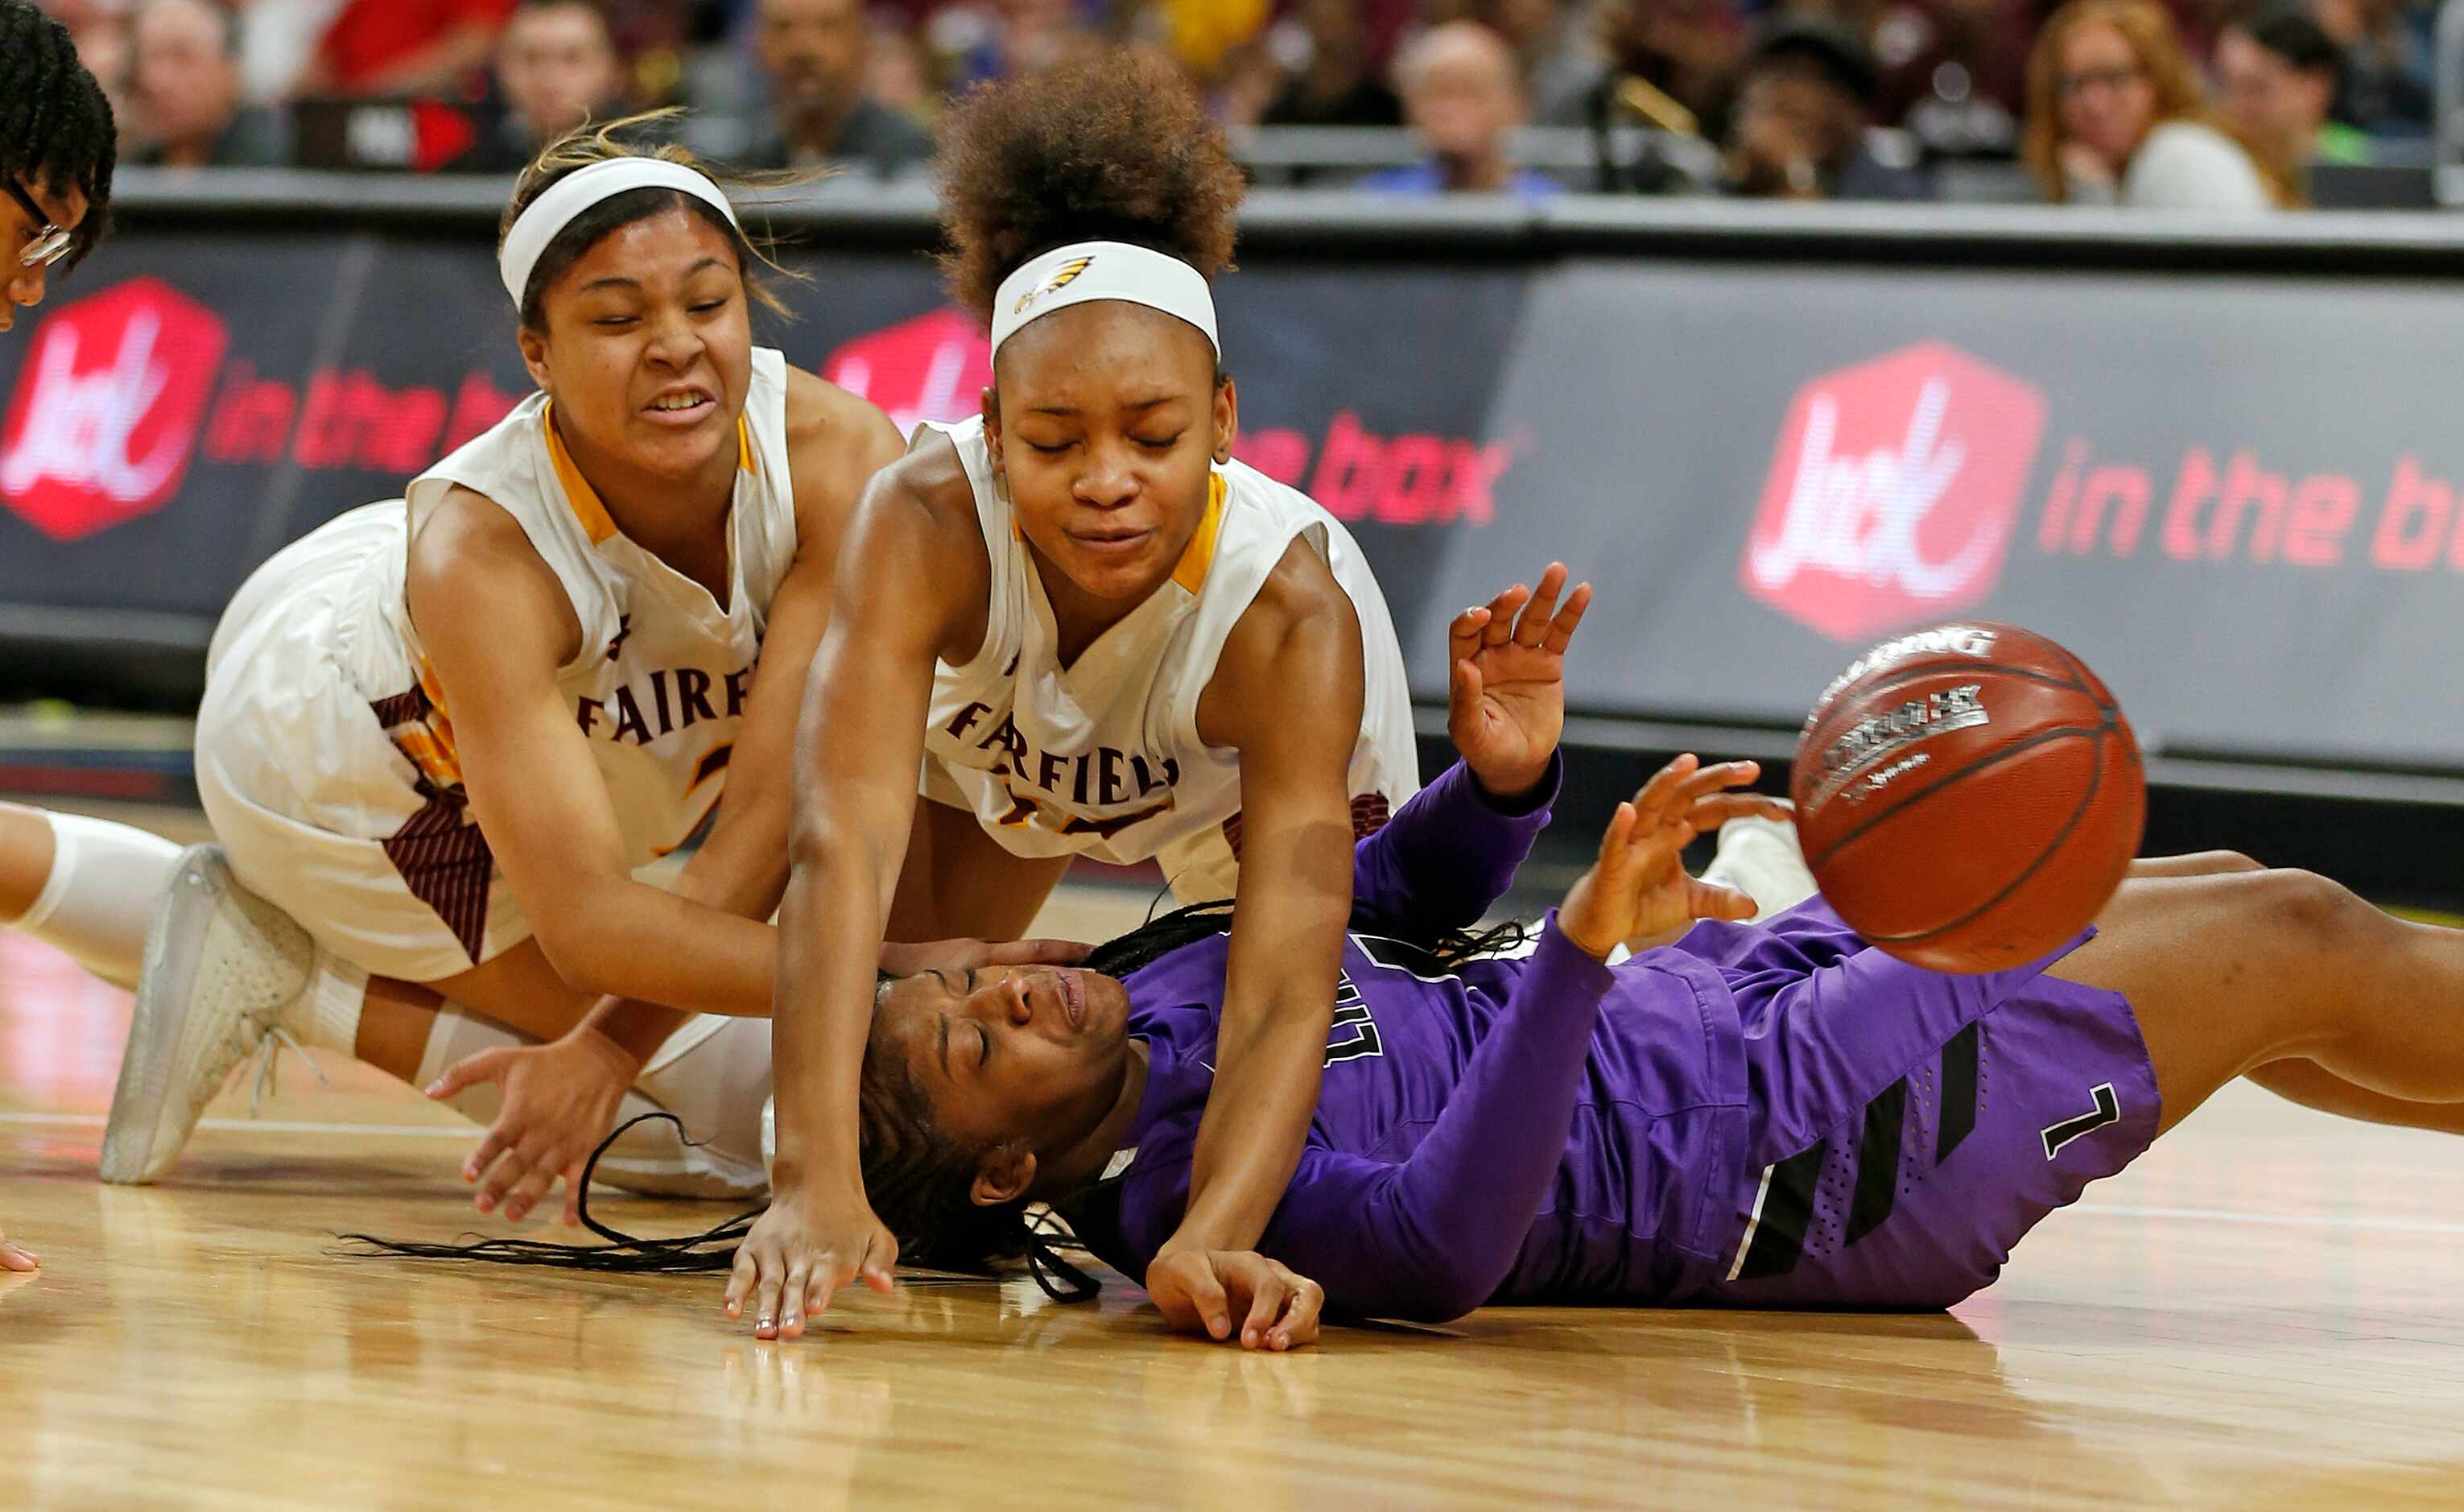 Lincoln guard Alexis Brown (#1) is pressured by Fairfield guard Shadasia Brackens (#20) for...